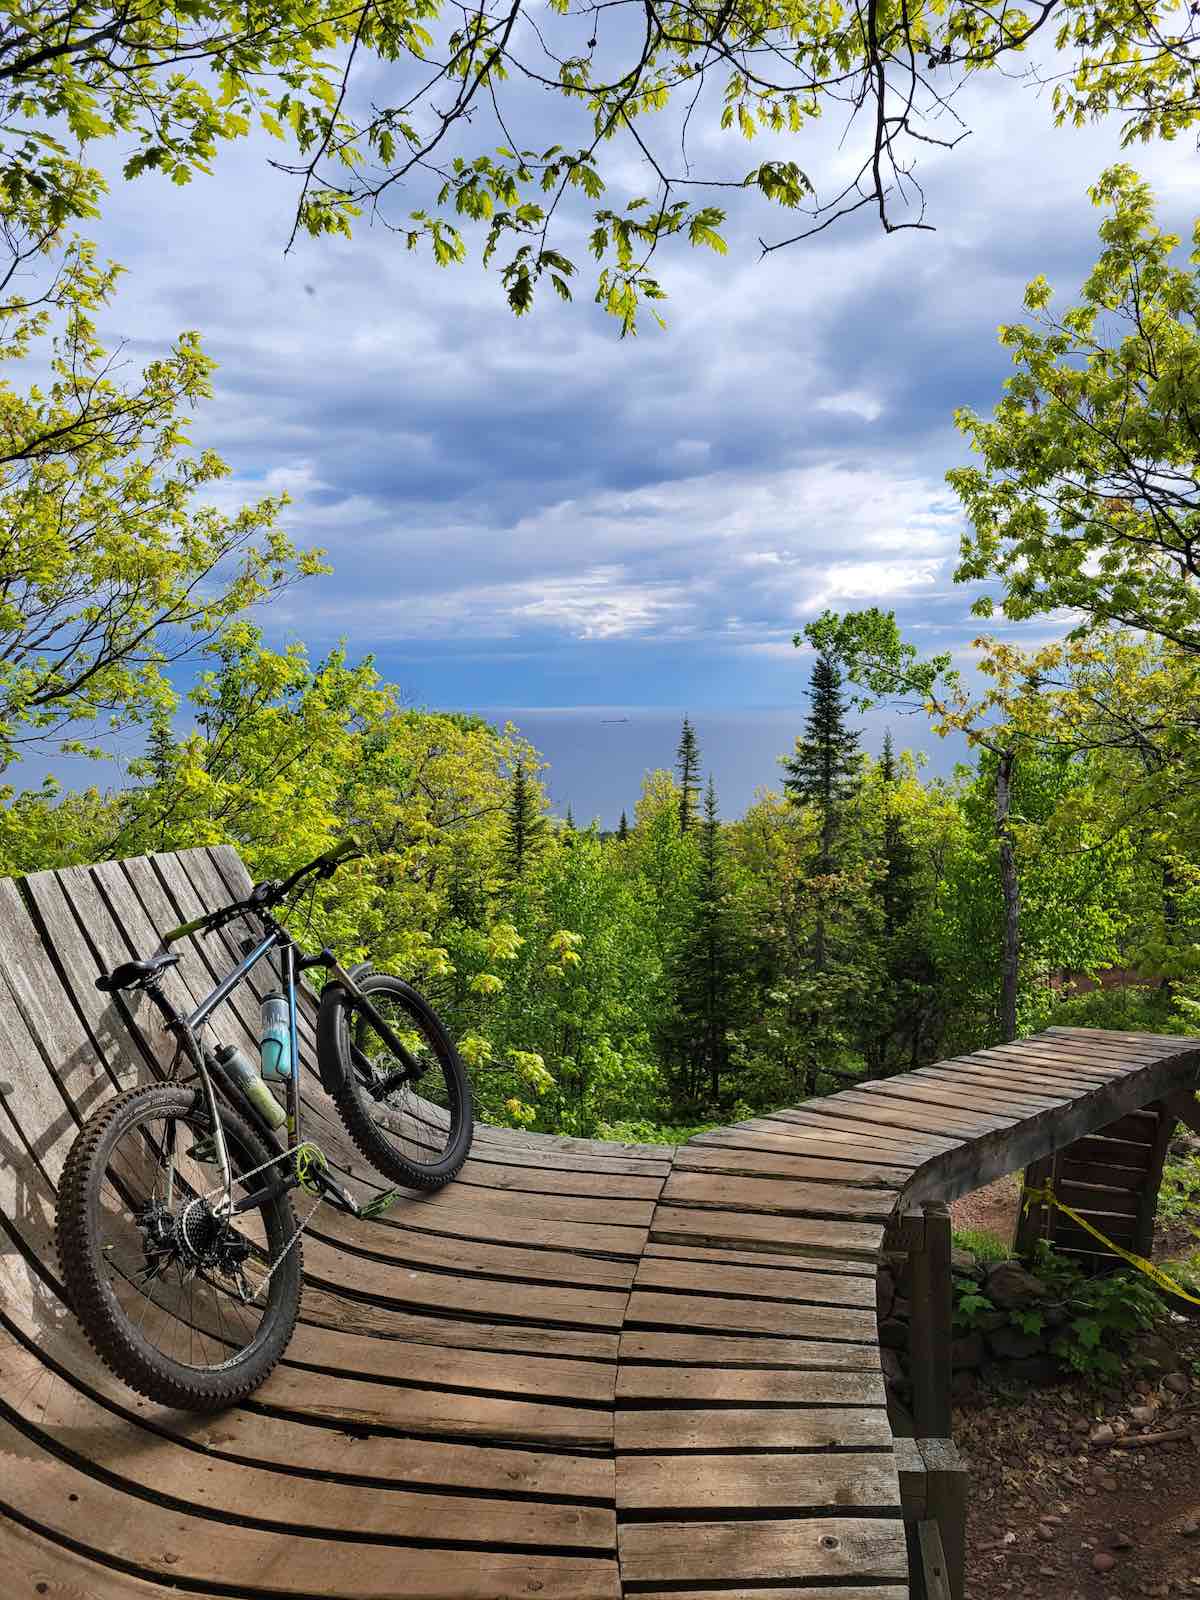 bikerumor pic of the day a wooden mountain bike trail bridge ramp has a mountain bike leaning against it, in the distance are pine trees and a harbor with a freighter that is very far away, there are clouds in the sky that are dark but it is sunny over the trees and wood trail.